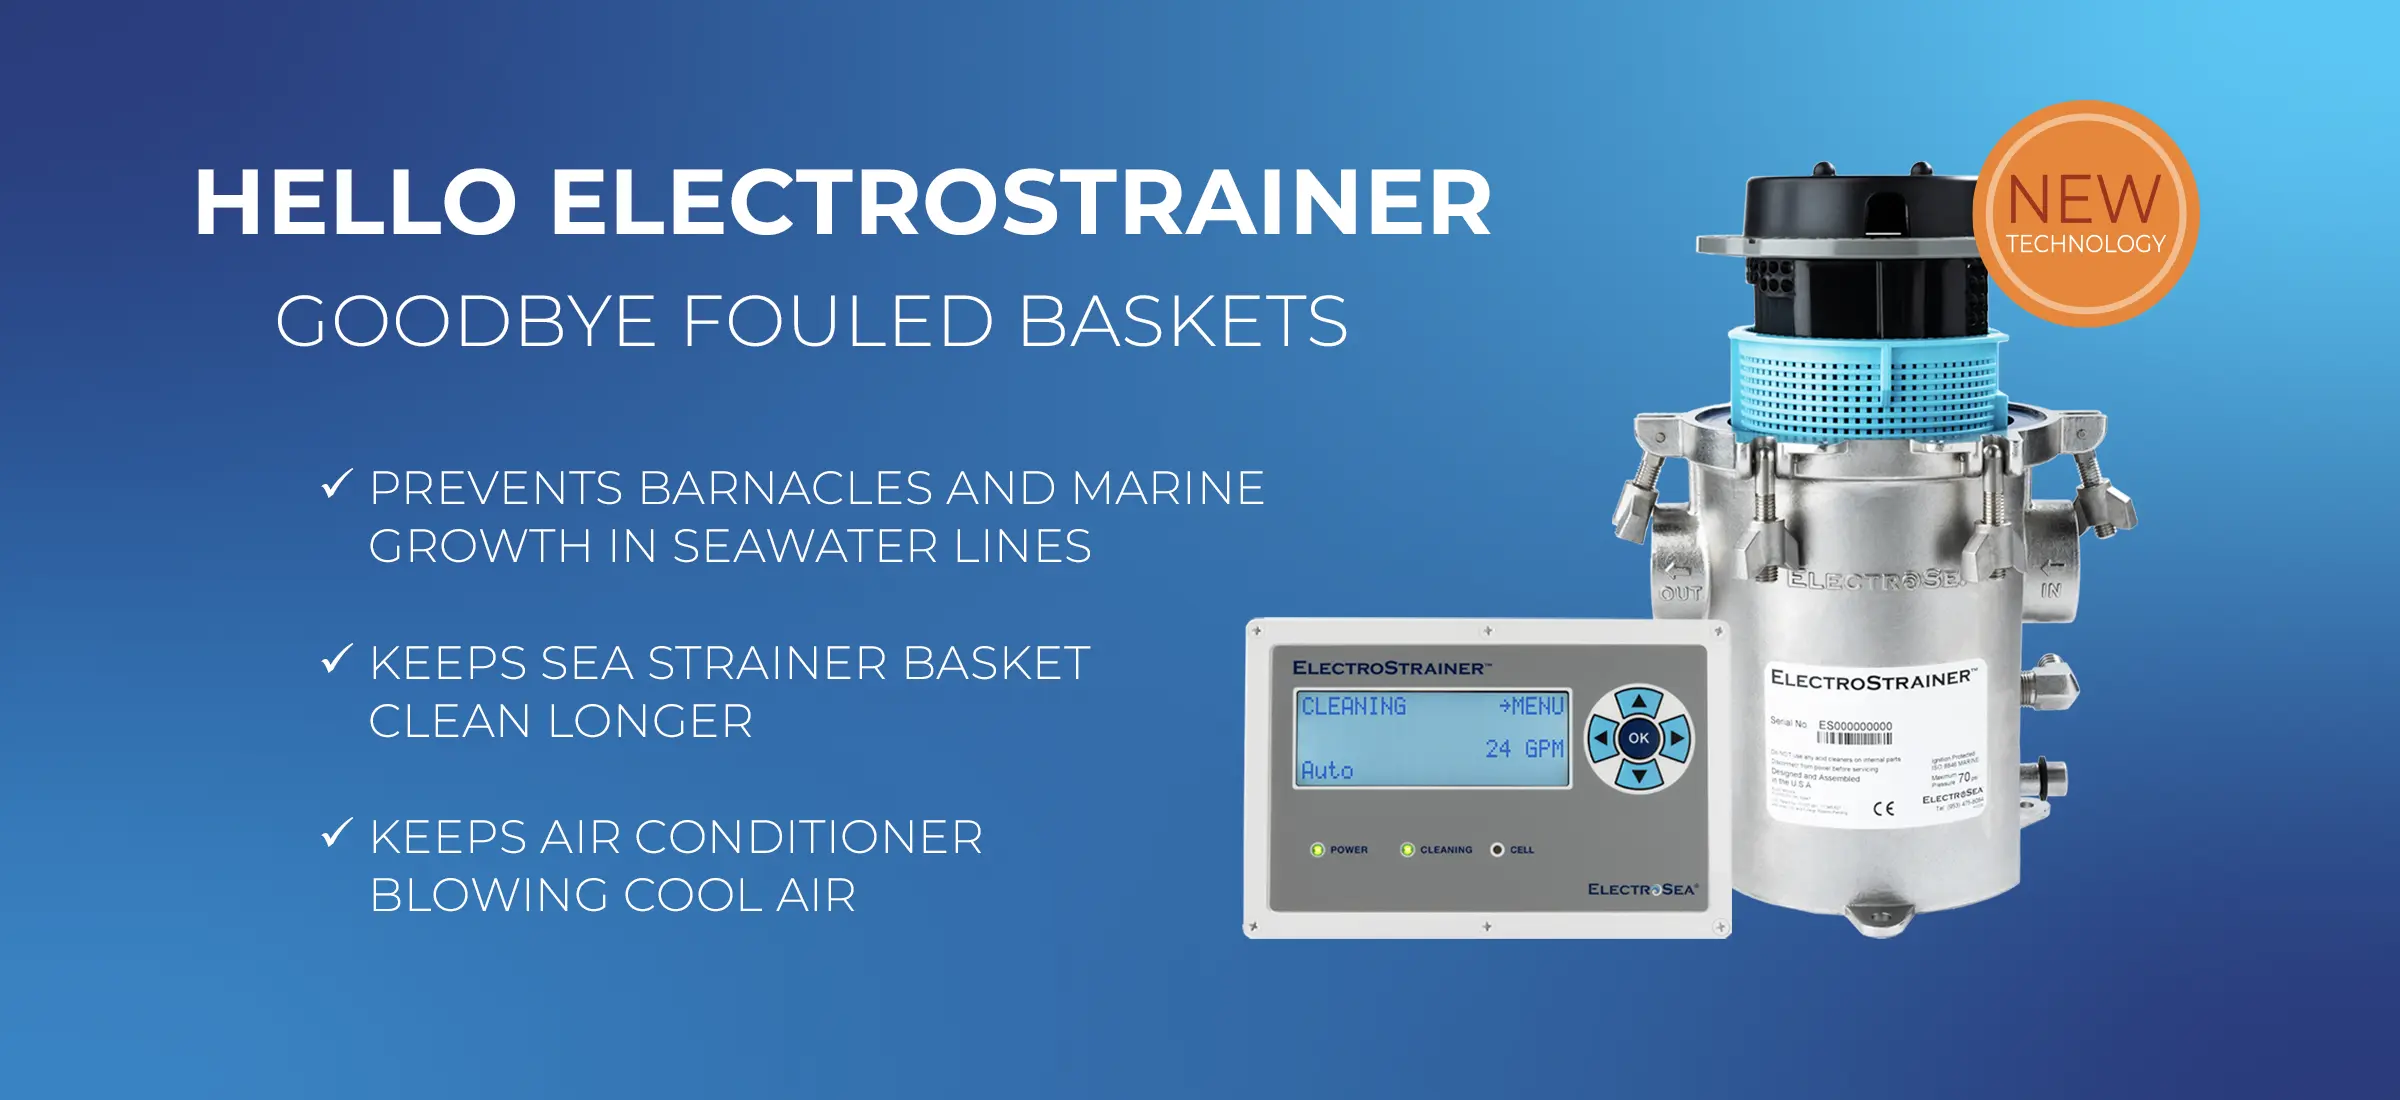 say goodbye to fouled sea strainer baskets with ElectroStrainer